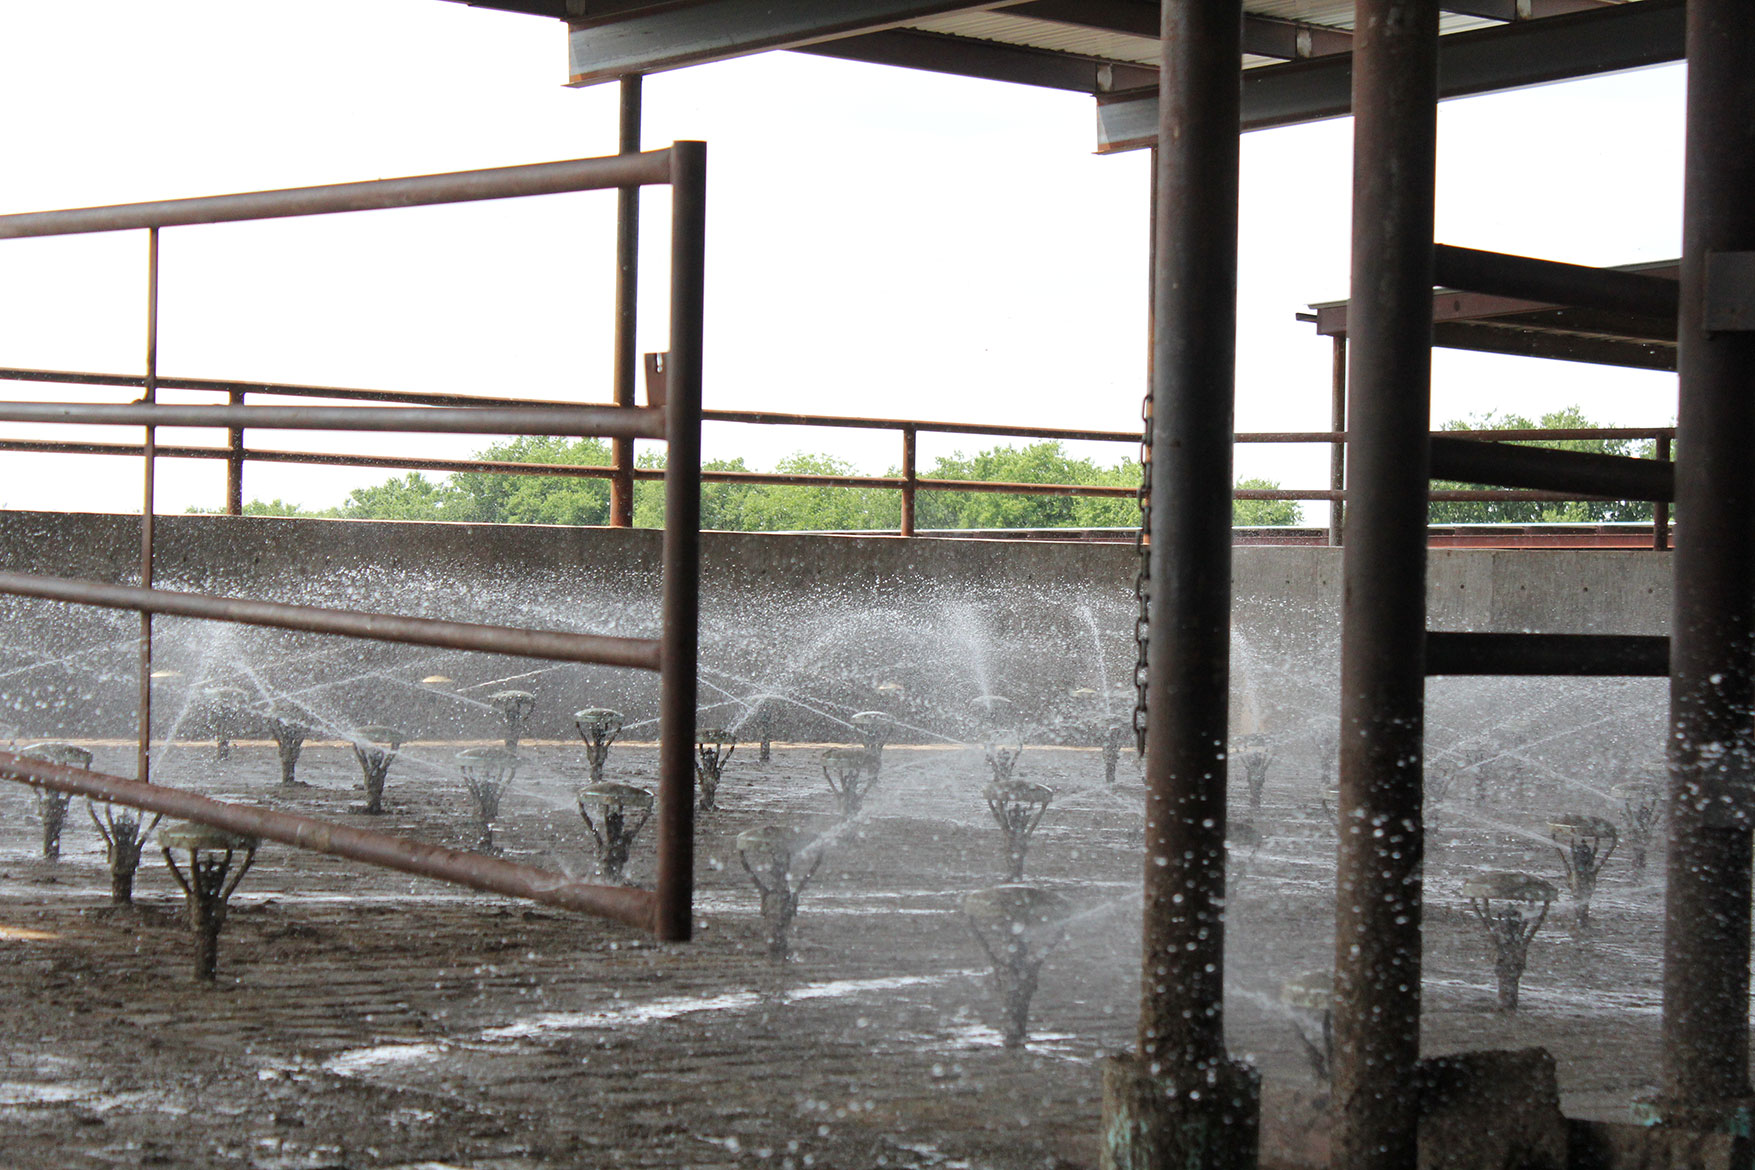 A foot bath at the dairy farm ensures the cows' hooves stay clean and healthy.